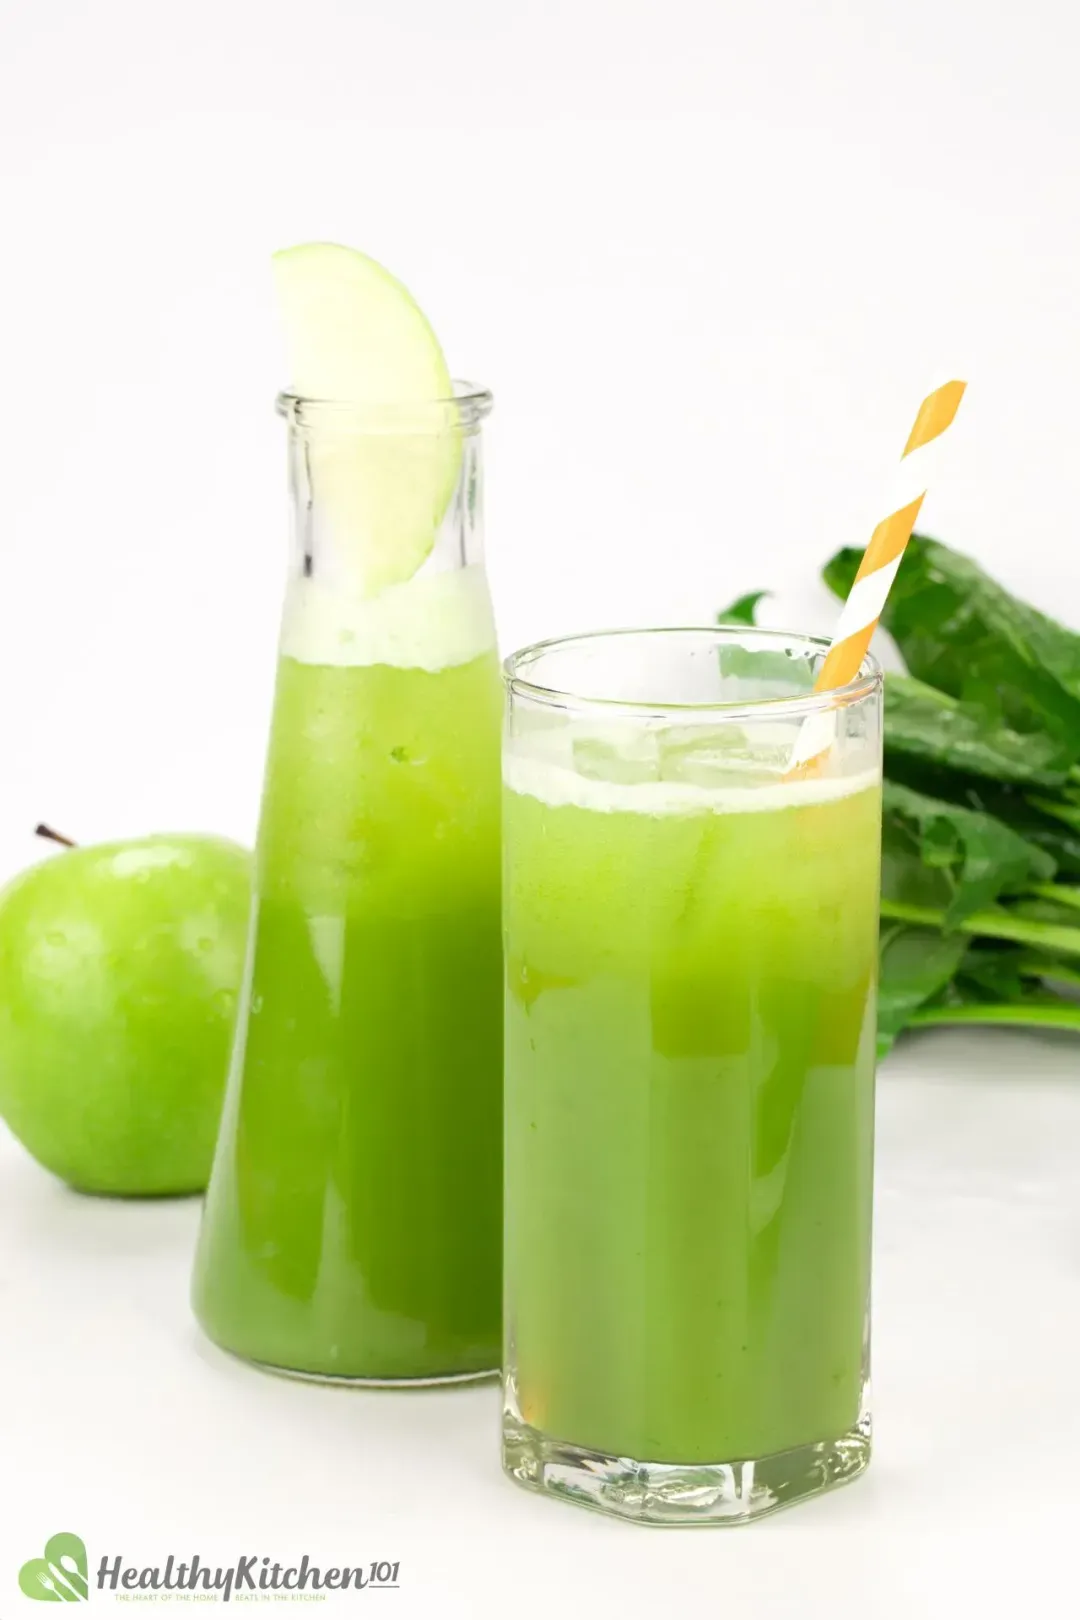 A glass and a pitcher of green apple juice decorated with an orange-striped straw and a slice of green apple with a whole green apple and spinach in the background